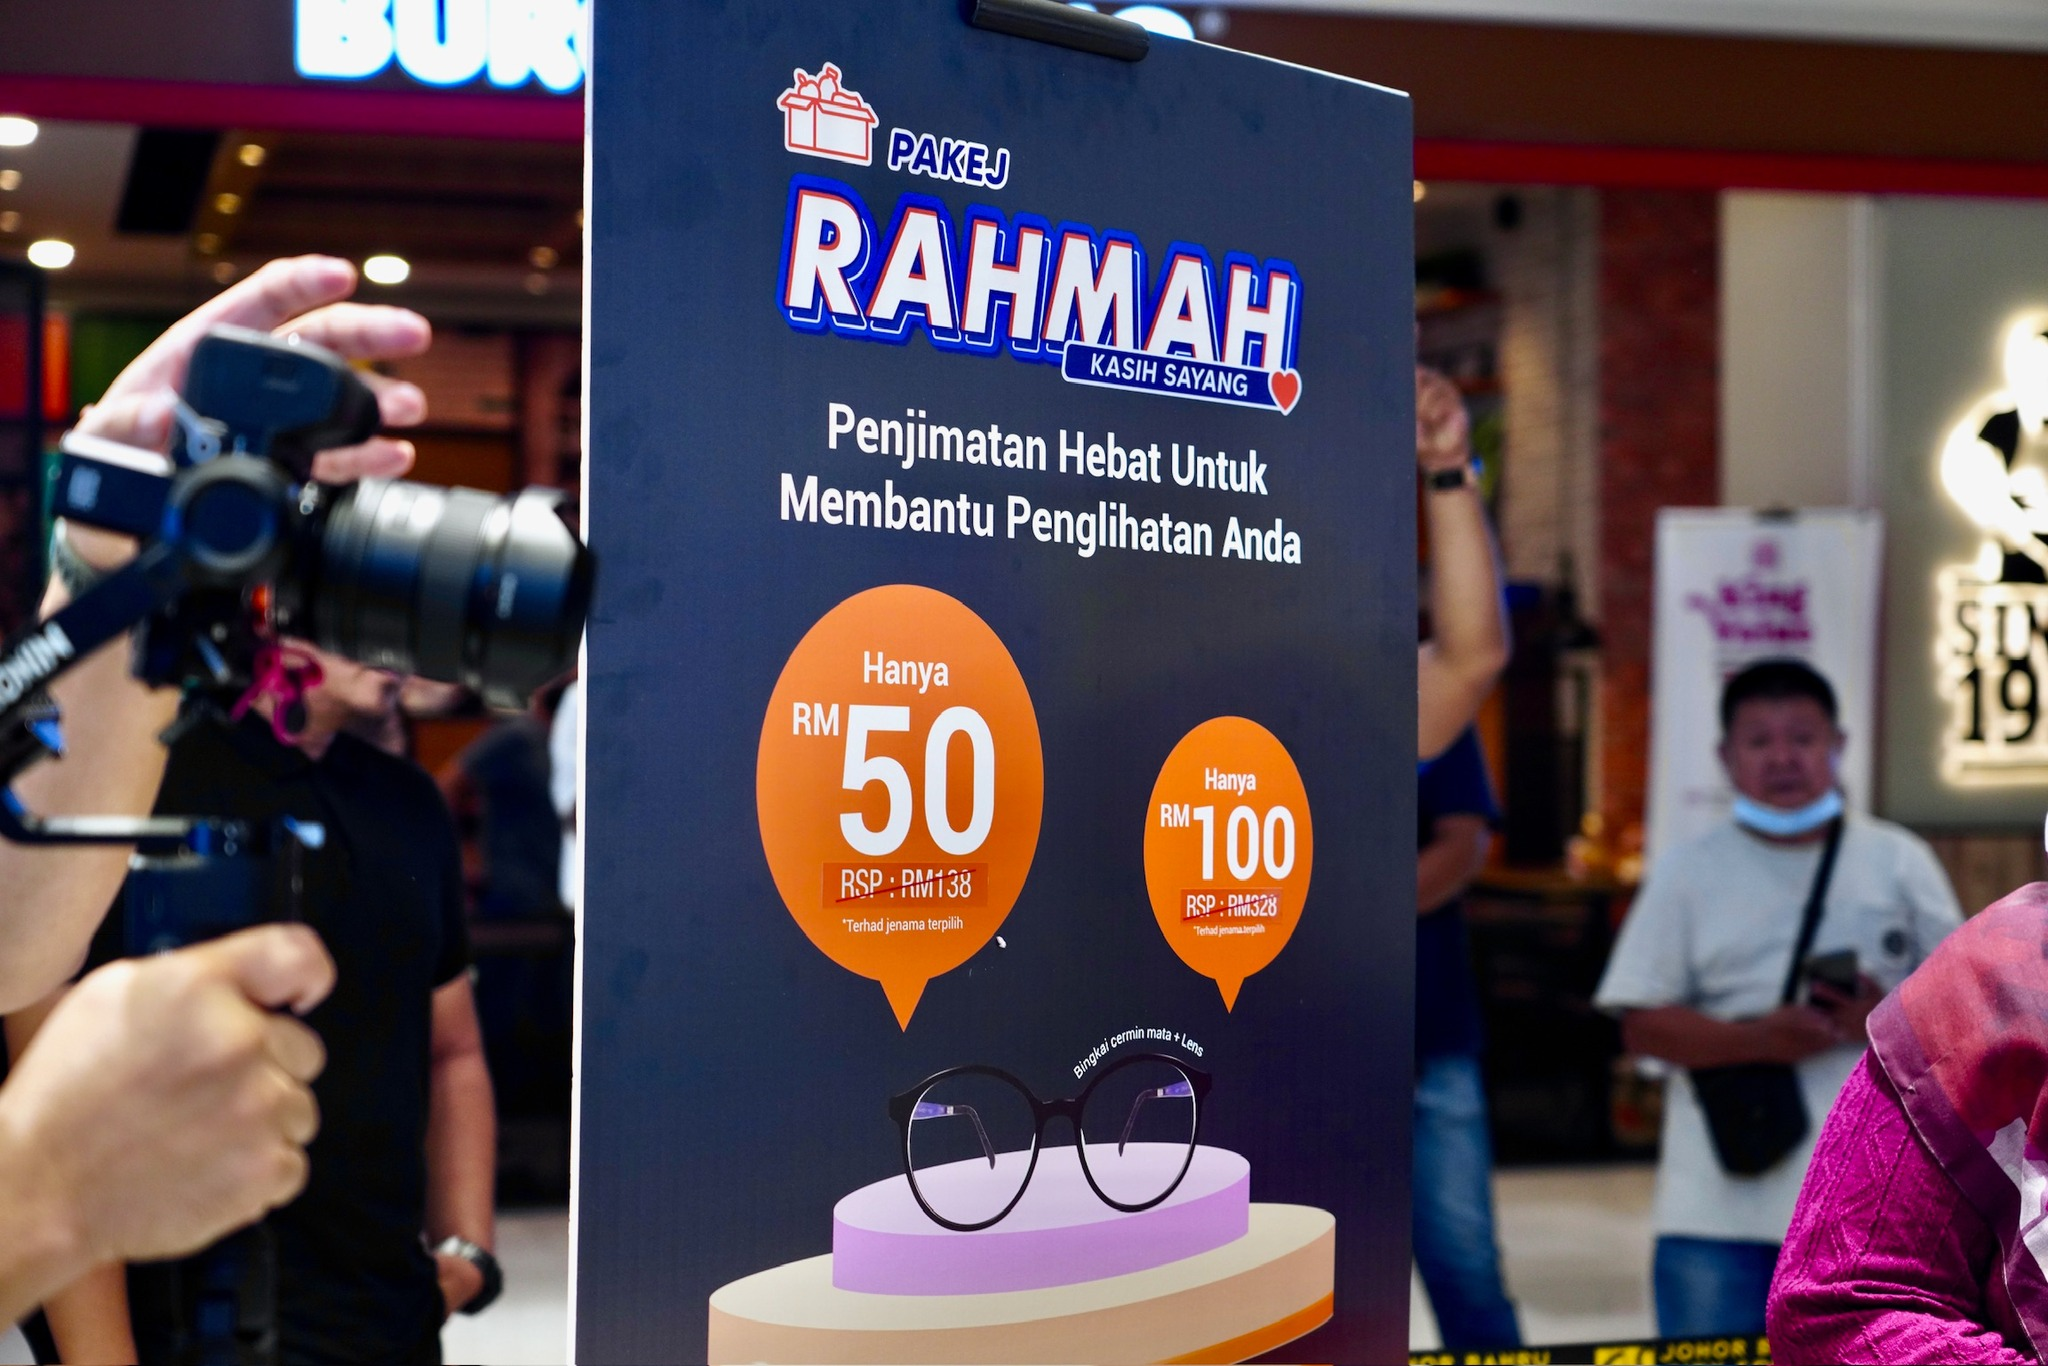 M'sians are now able to buy glasses from as low as rm50 under the new payung rahmah initiative | weirdkaya